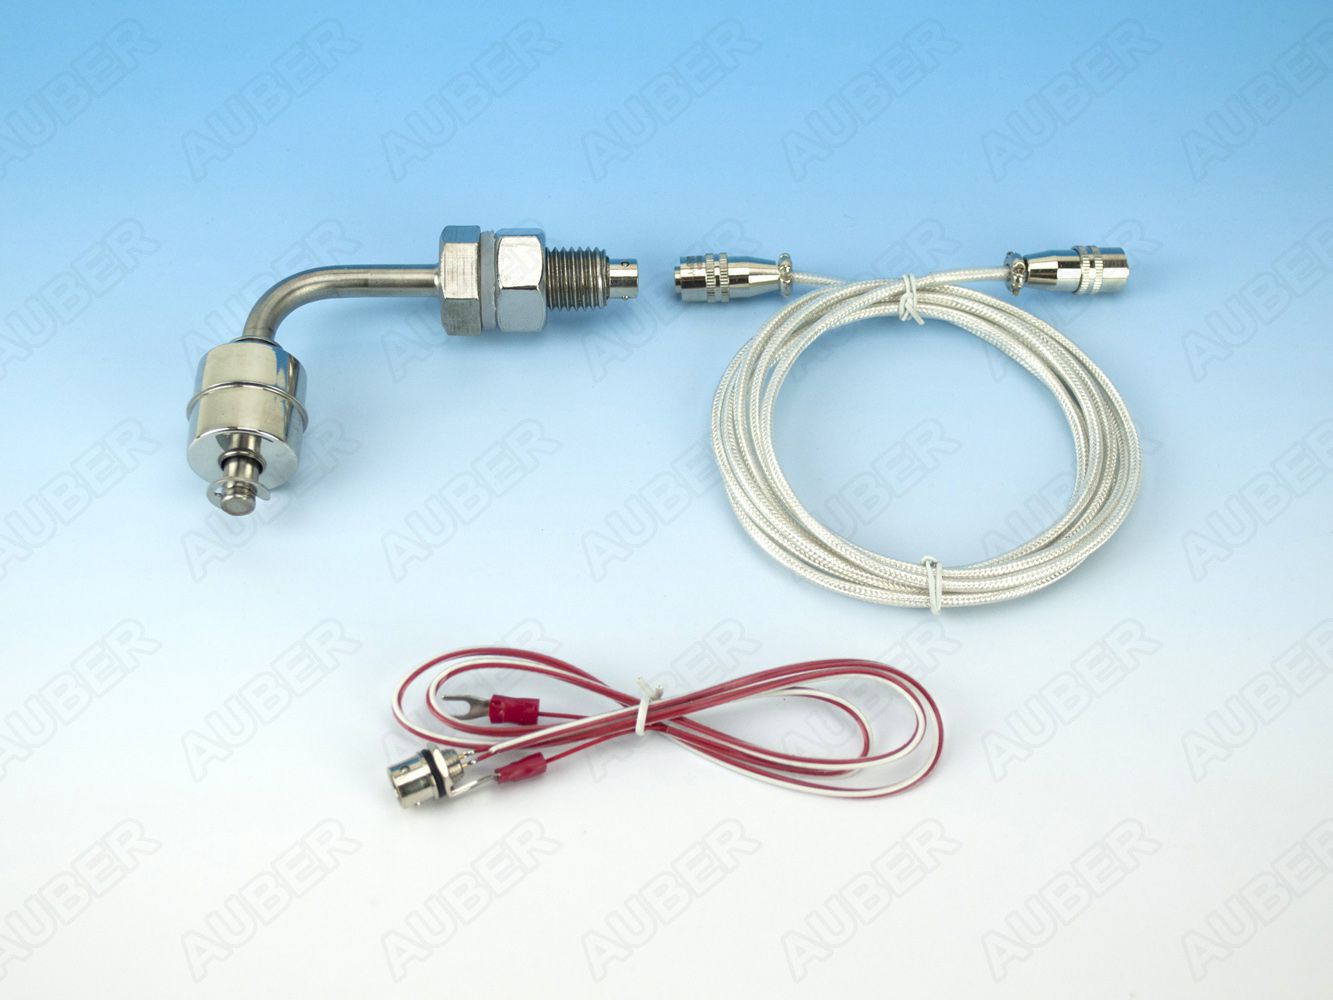 Liquid Level Control Switch. W/ Detachable Cable (Out of Stock)